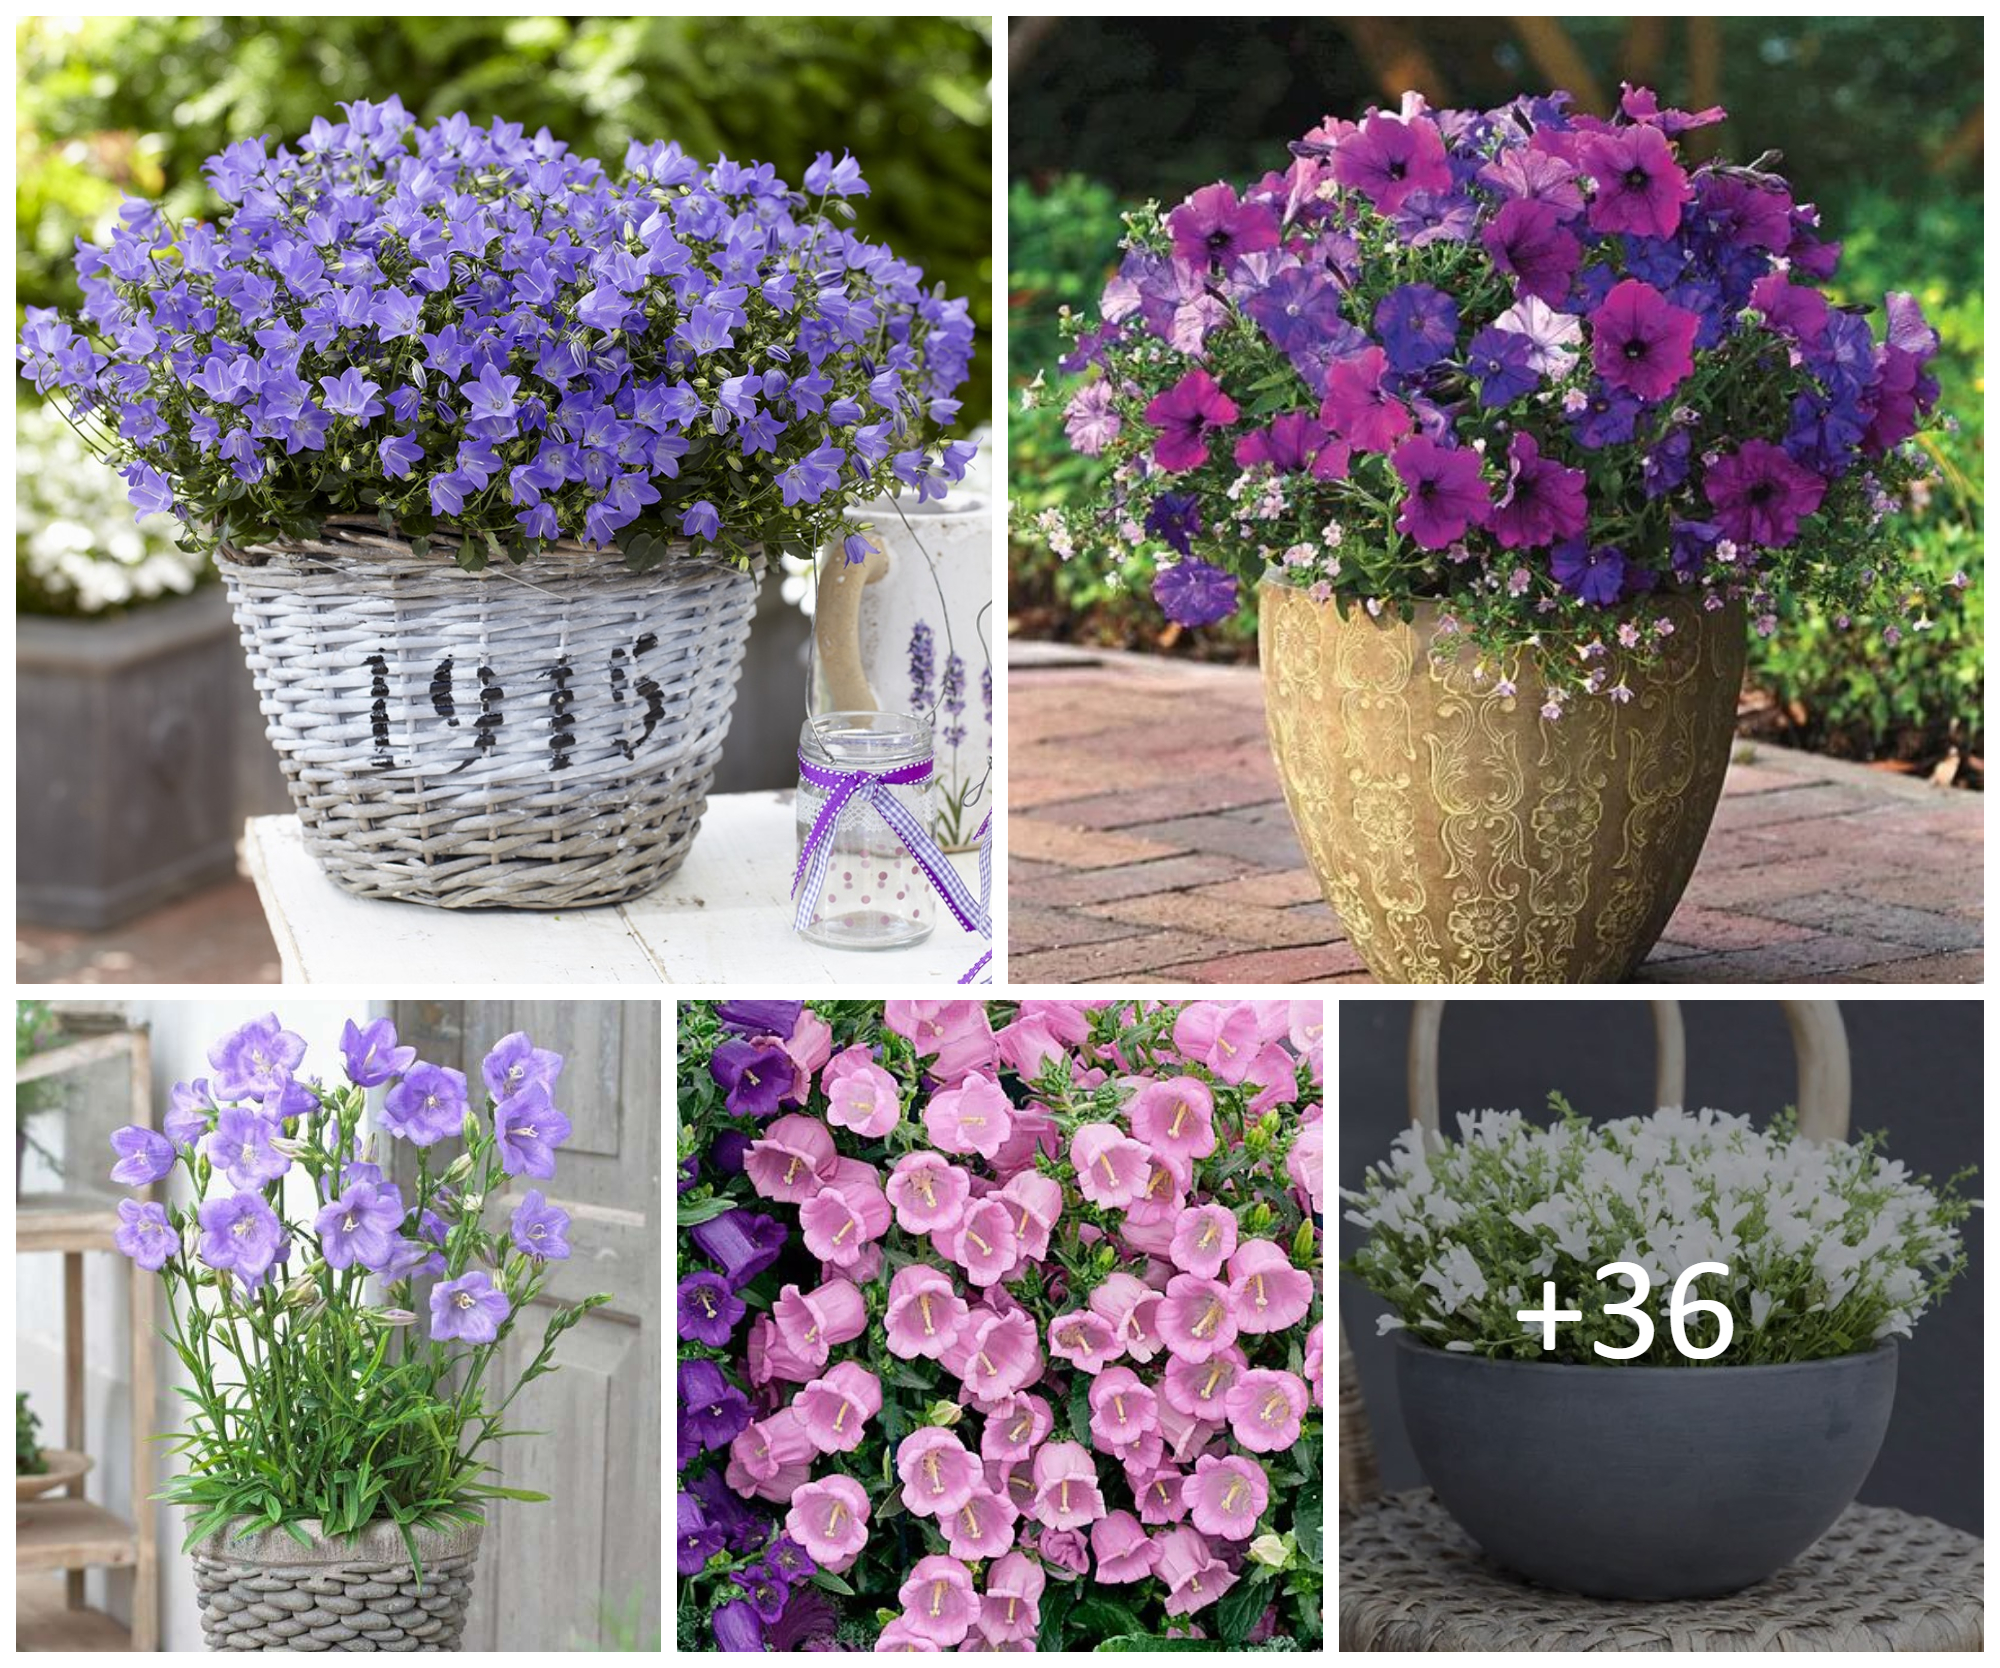 Campanula Guide: How to Grow & Care for “Bellflower”